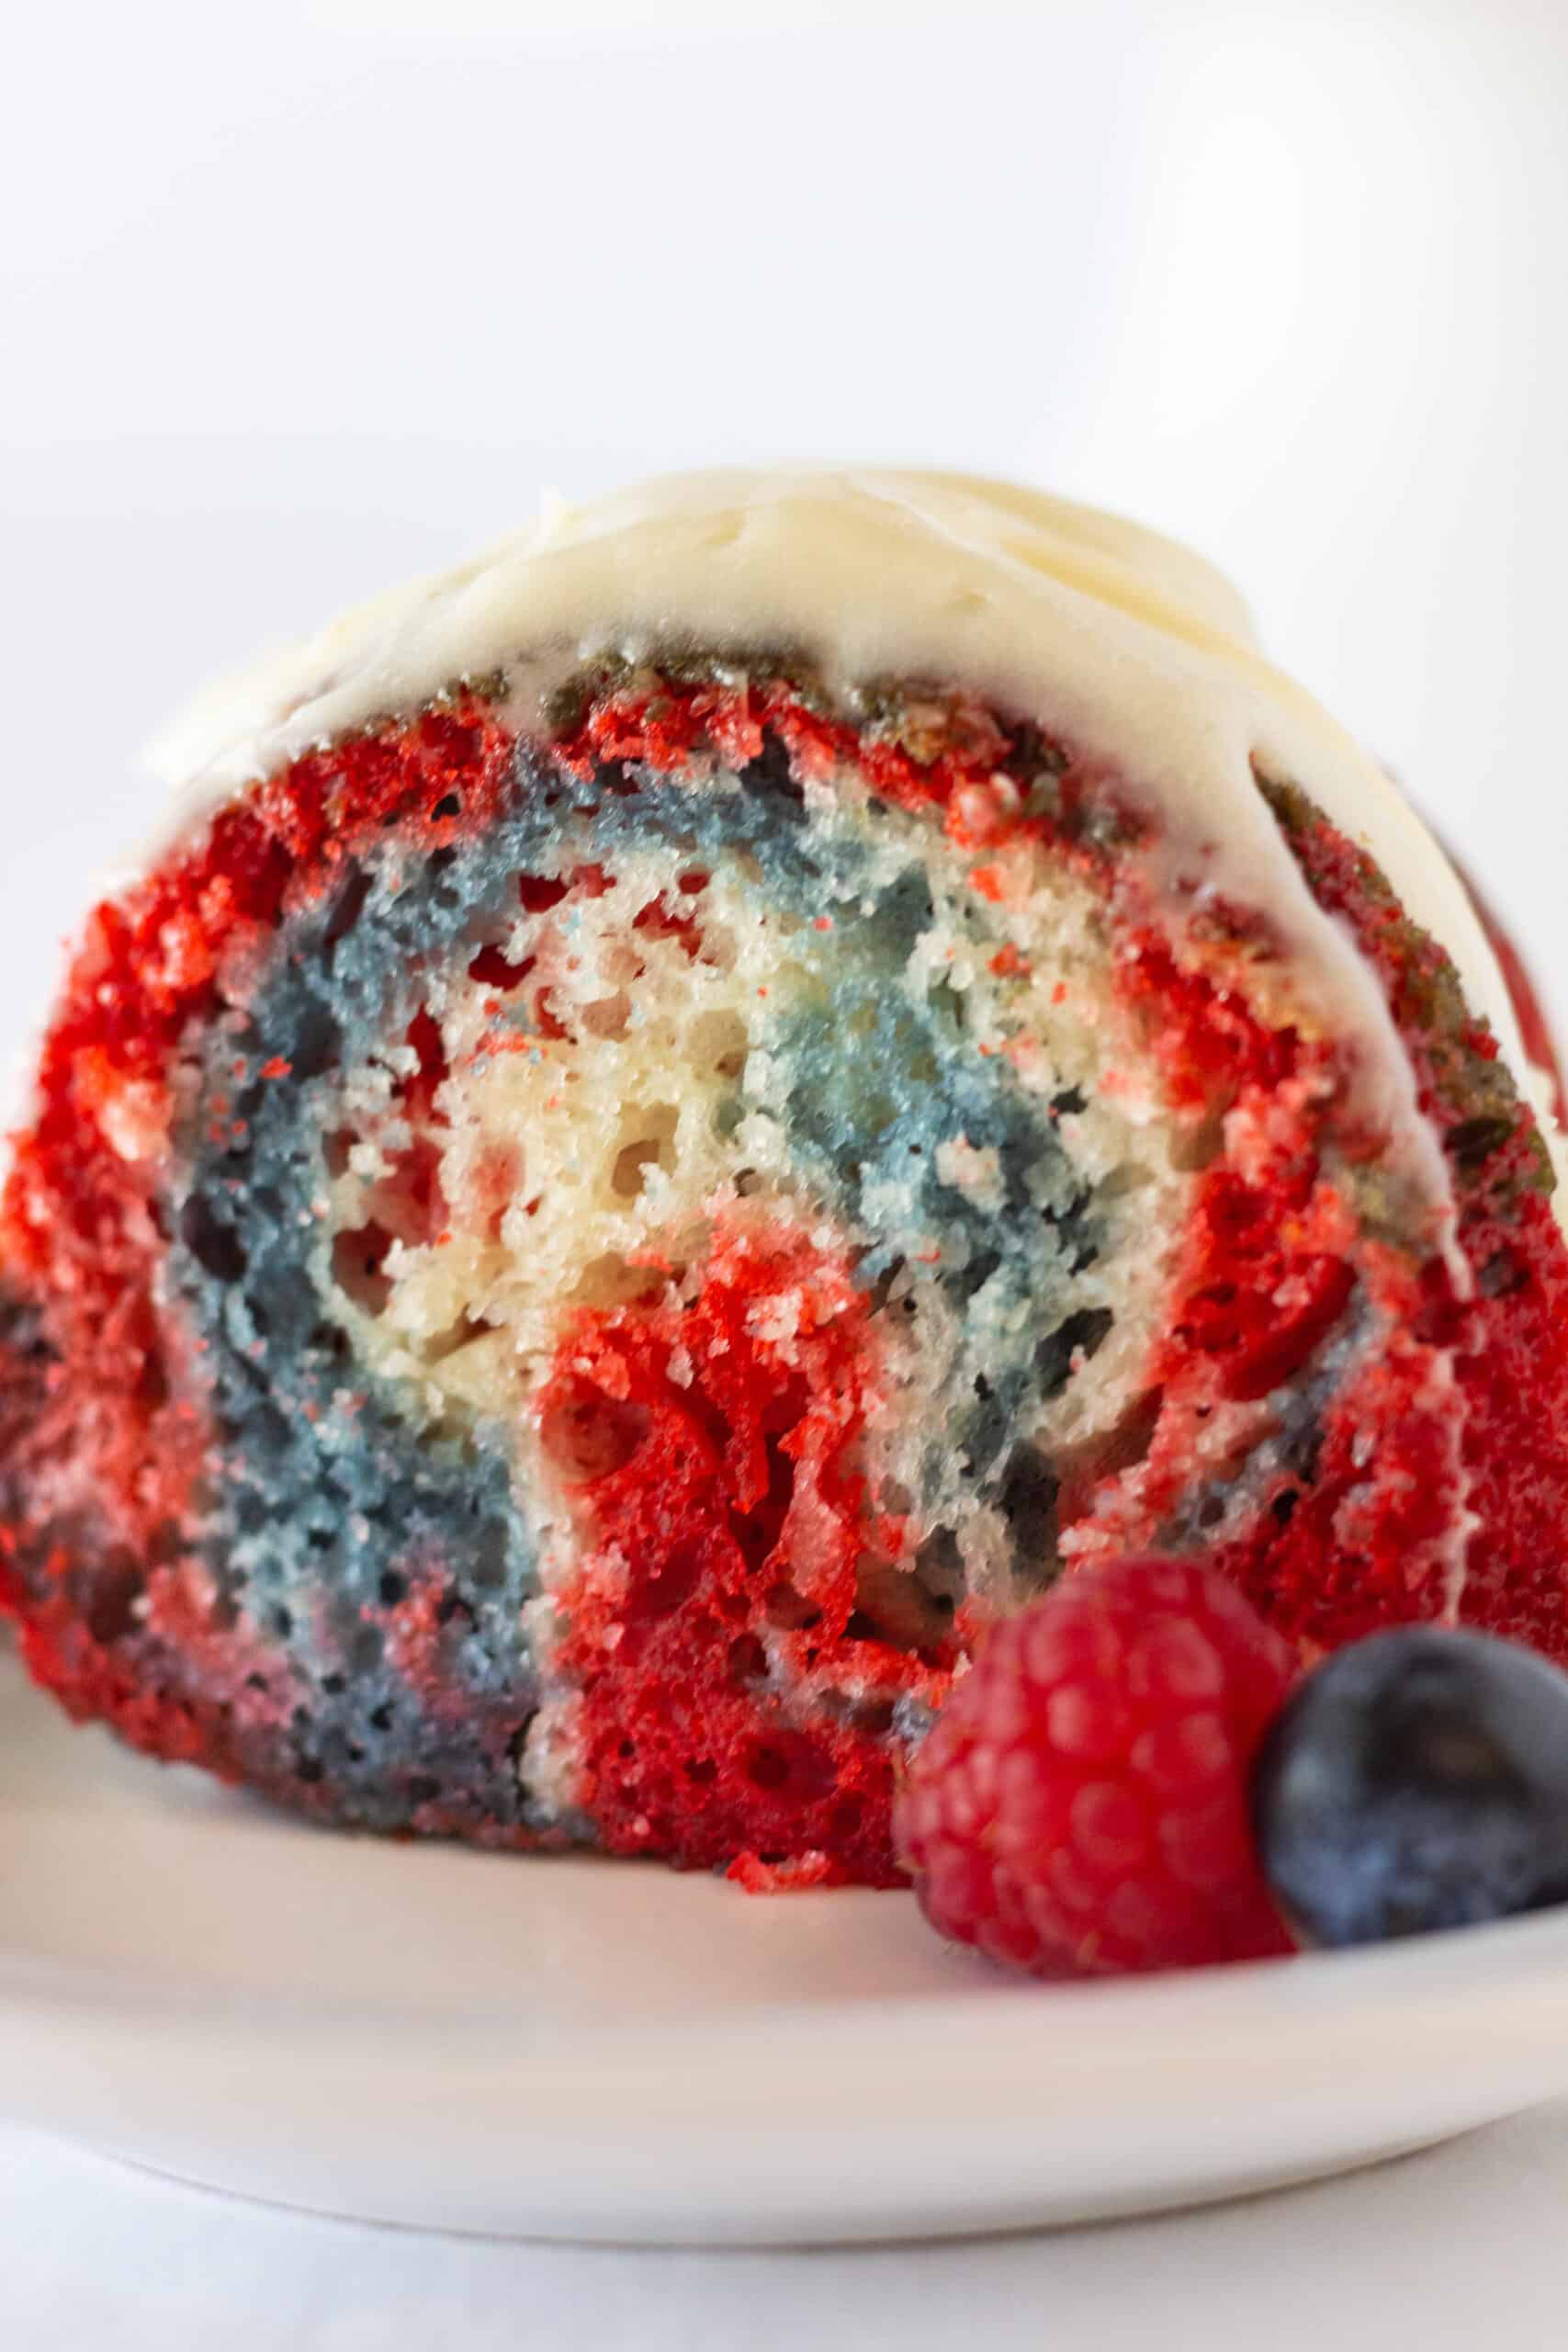 Red White and Blue Velvet Bundt Cake Recipe with a Cake Mix, an Easy 4th of July Dessert Idea featured by top US dessert blogger, Practically Homemade